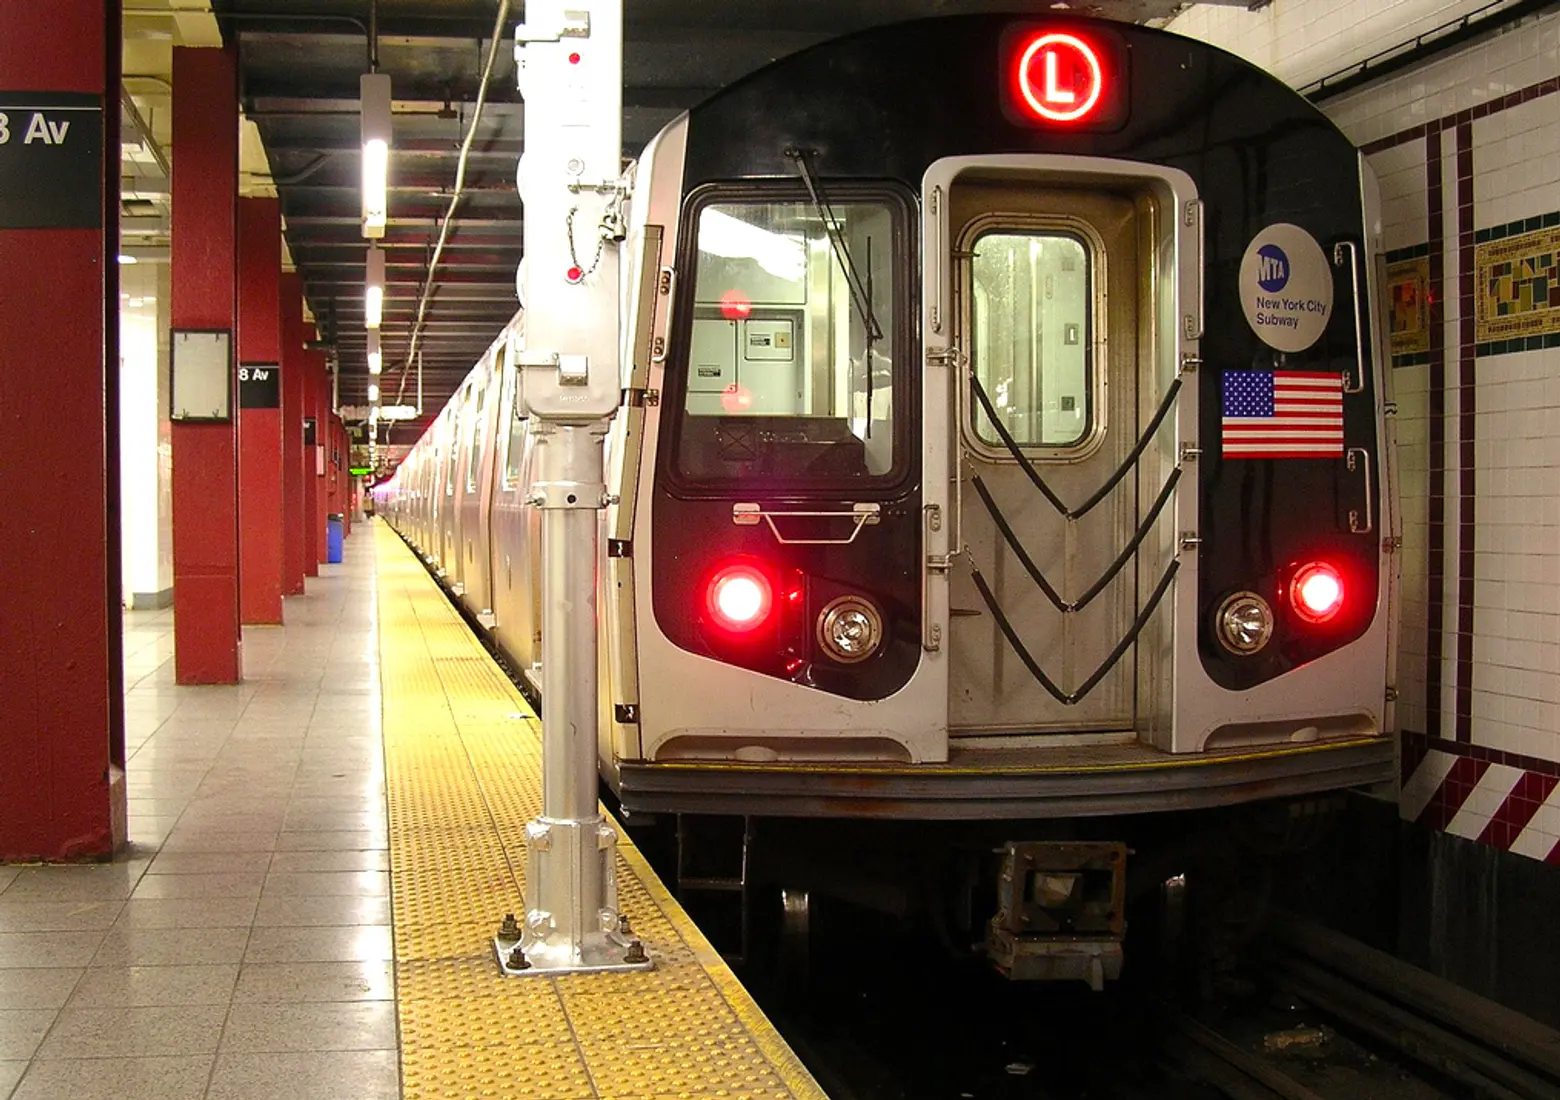 Expect more cuts to L train service this fall